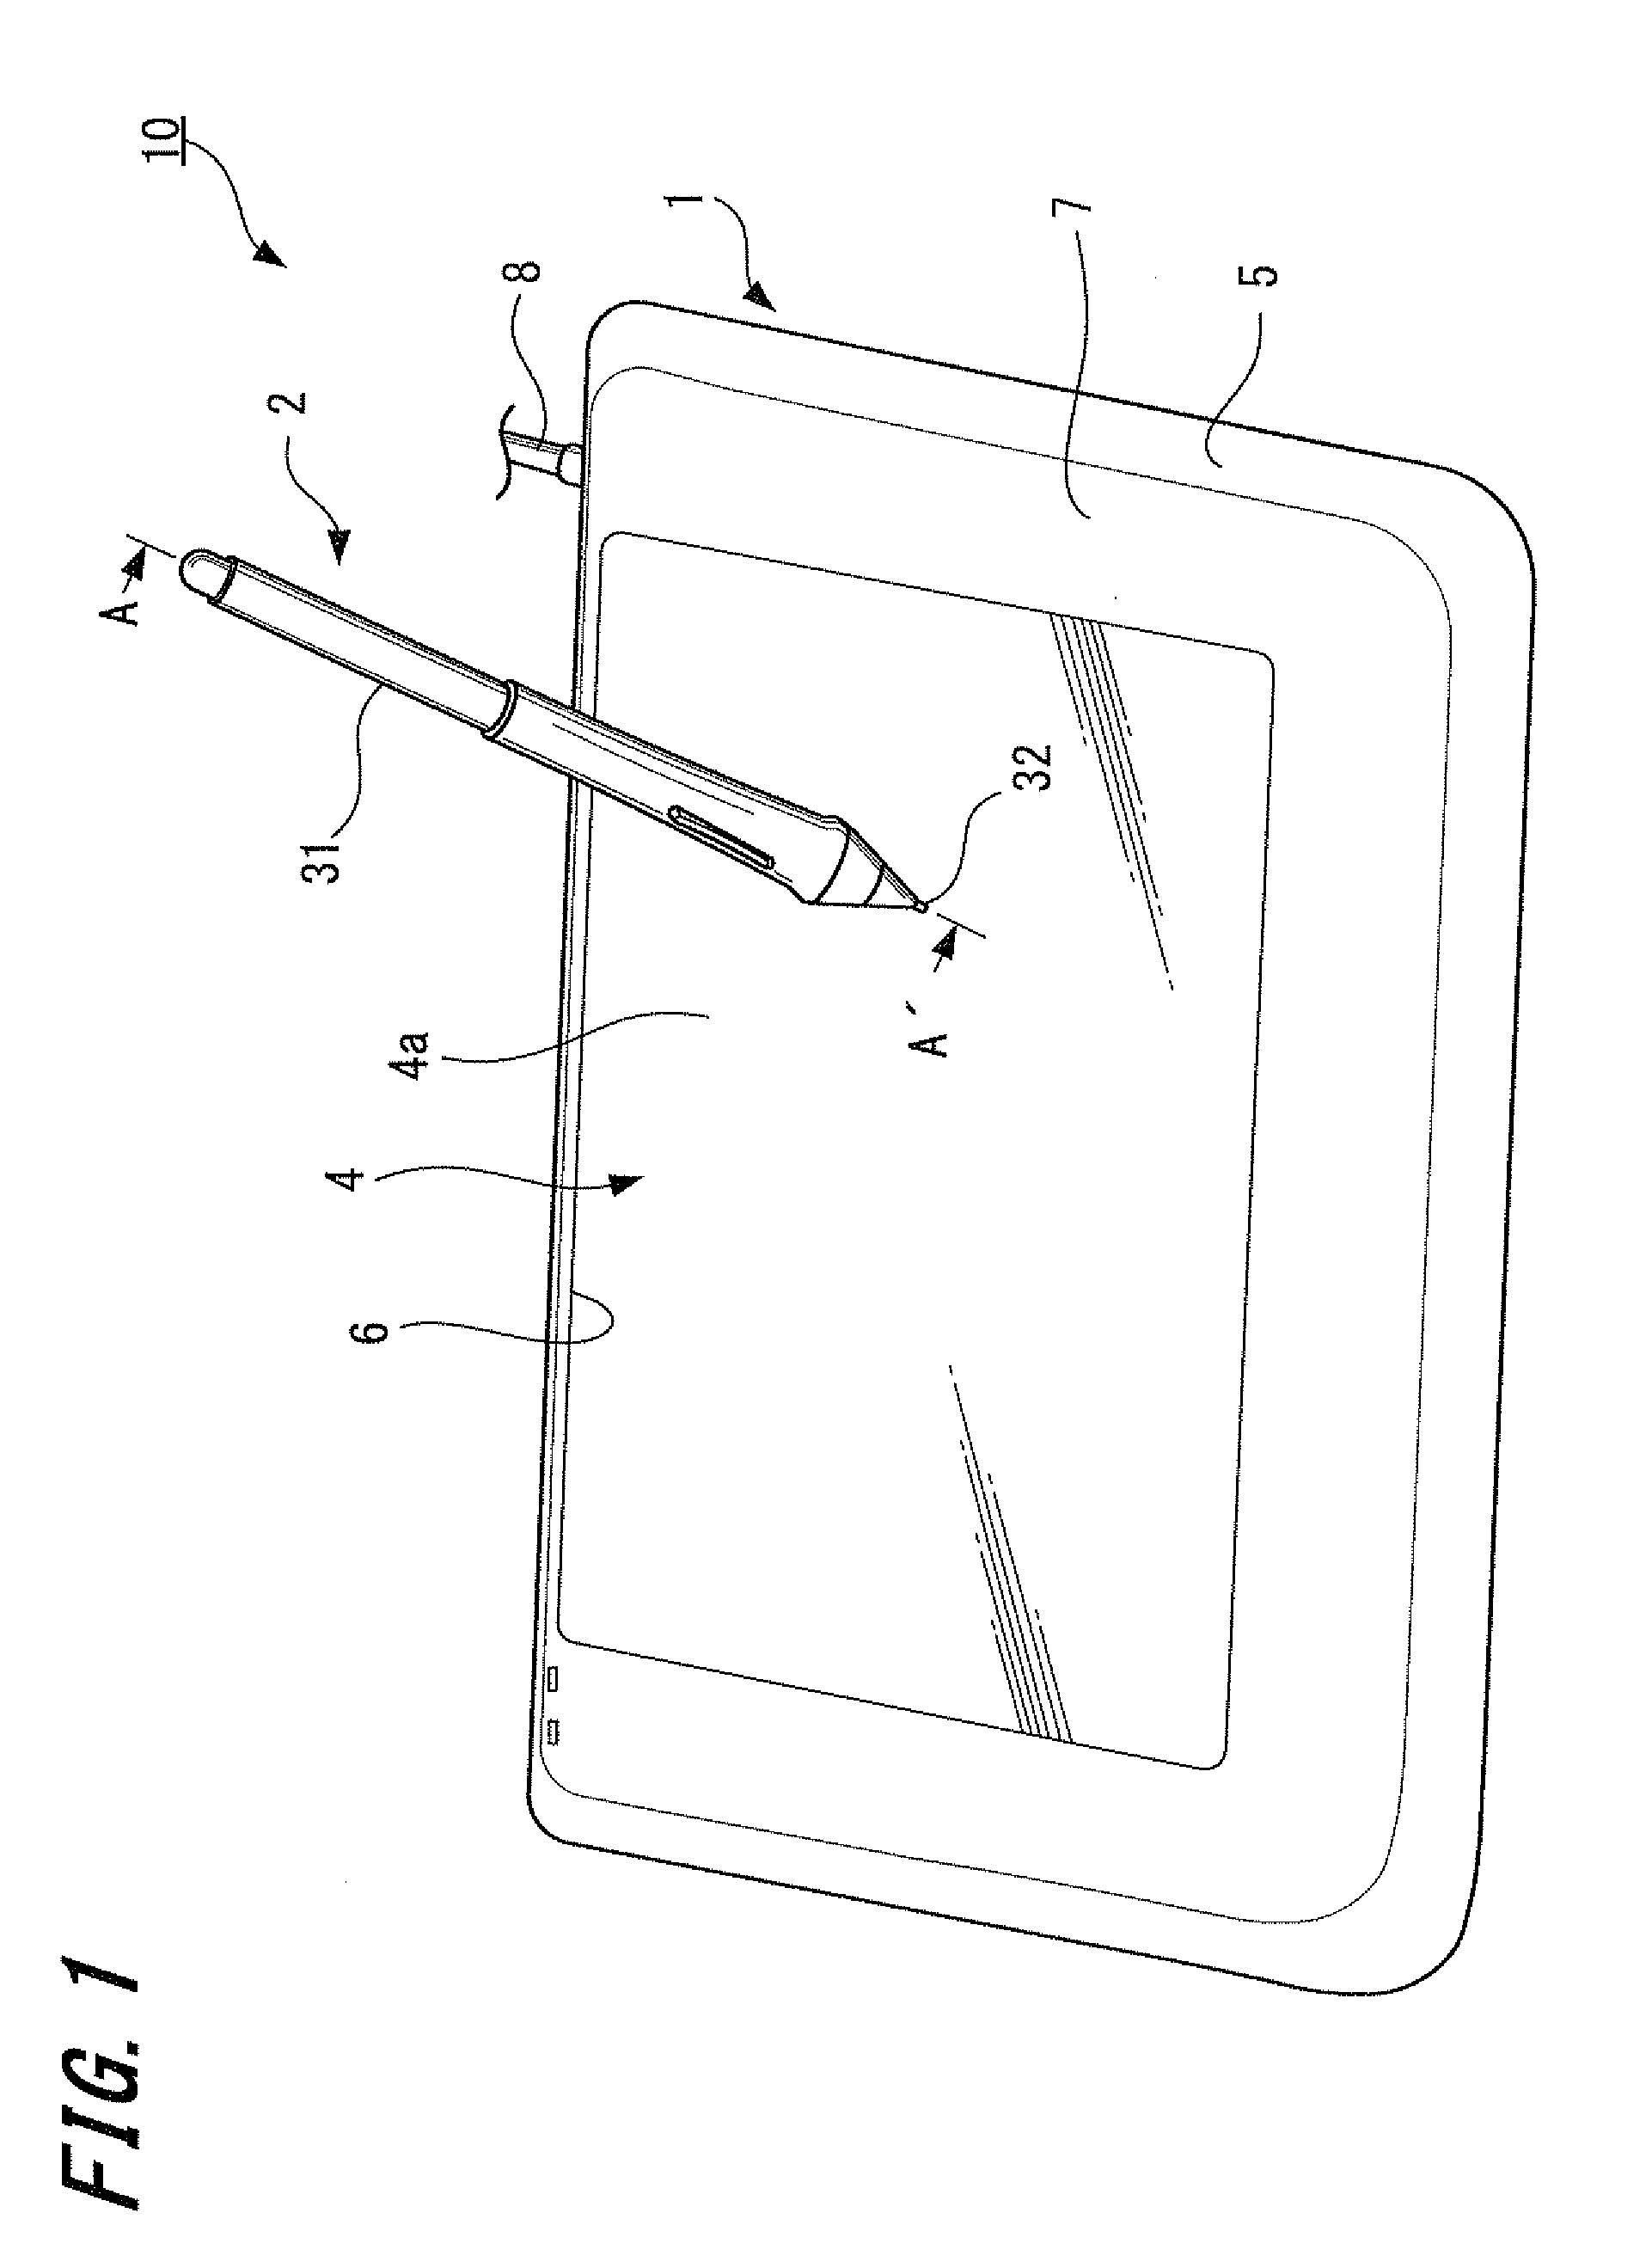 Position indicator, circuit component and input device